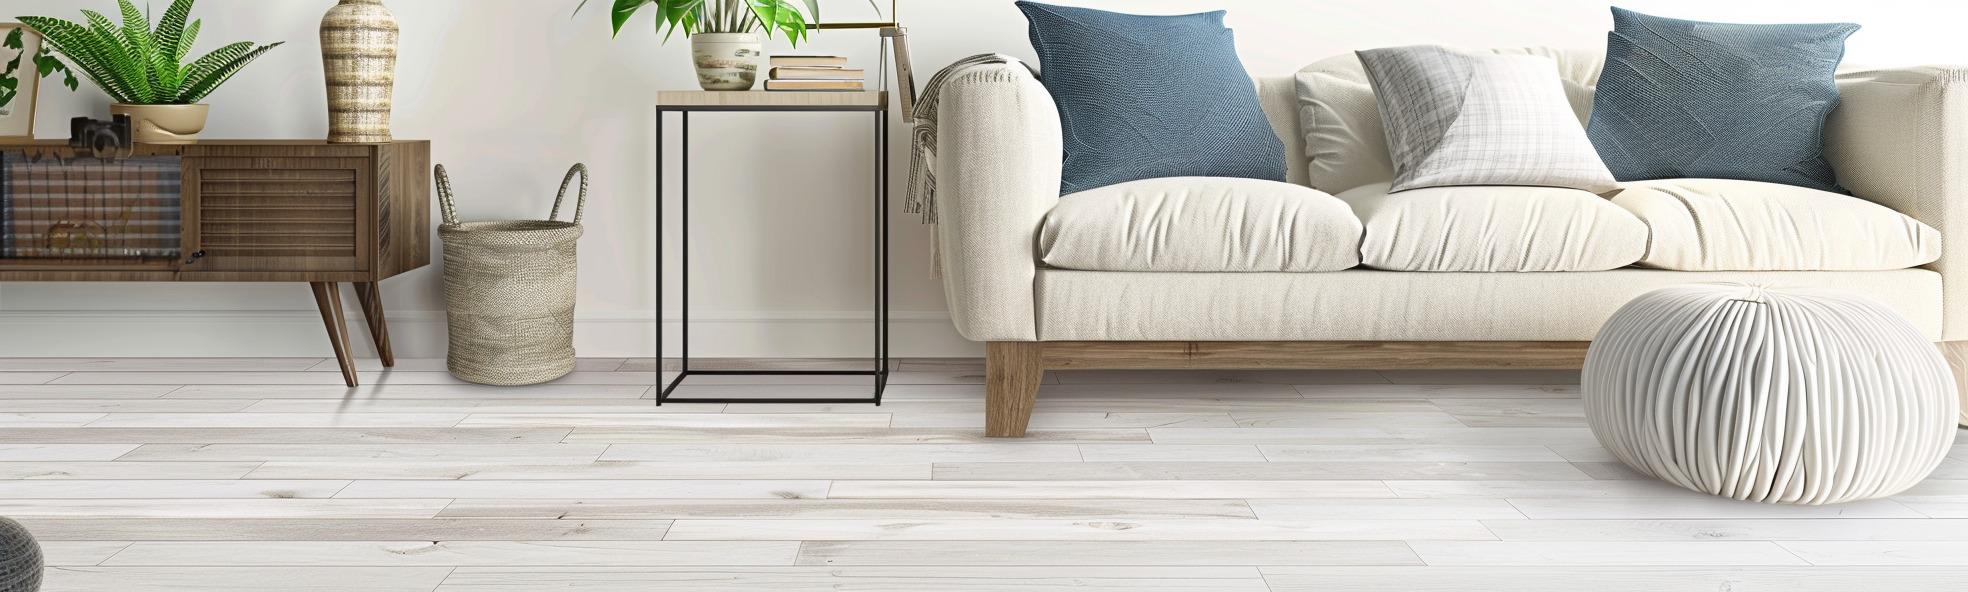 Effortlessly Revitalize Your Interiors with Our Peel and Stick Floor Tiles